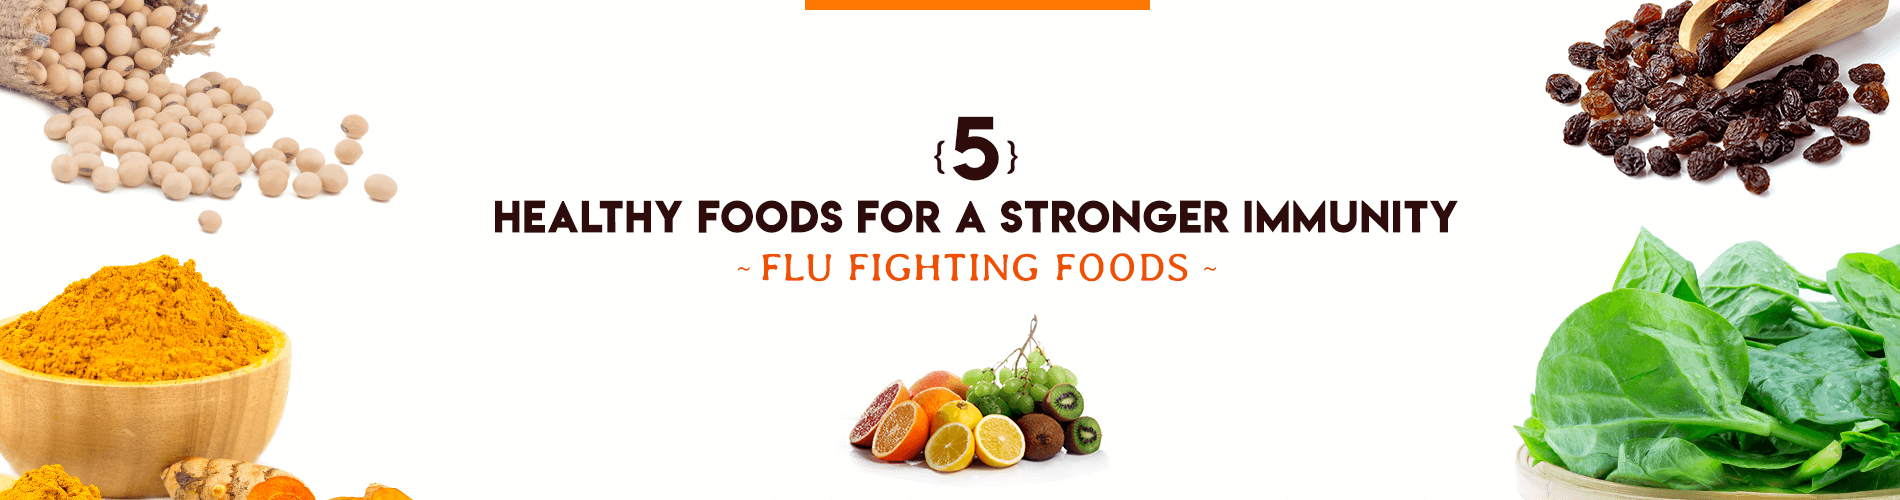 5 Healthy Foods for a Stronger Immunity: Flu Fighting Foods